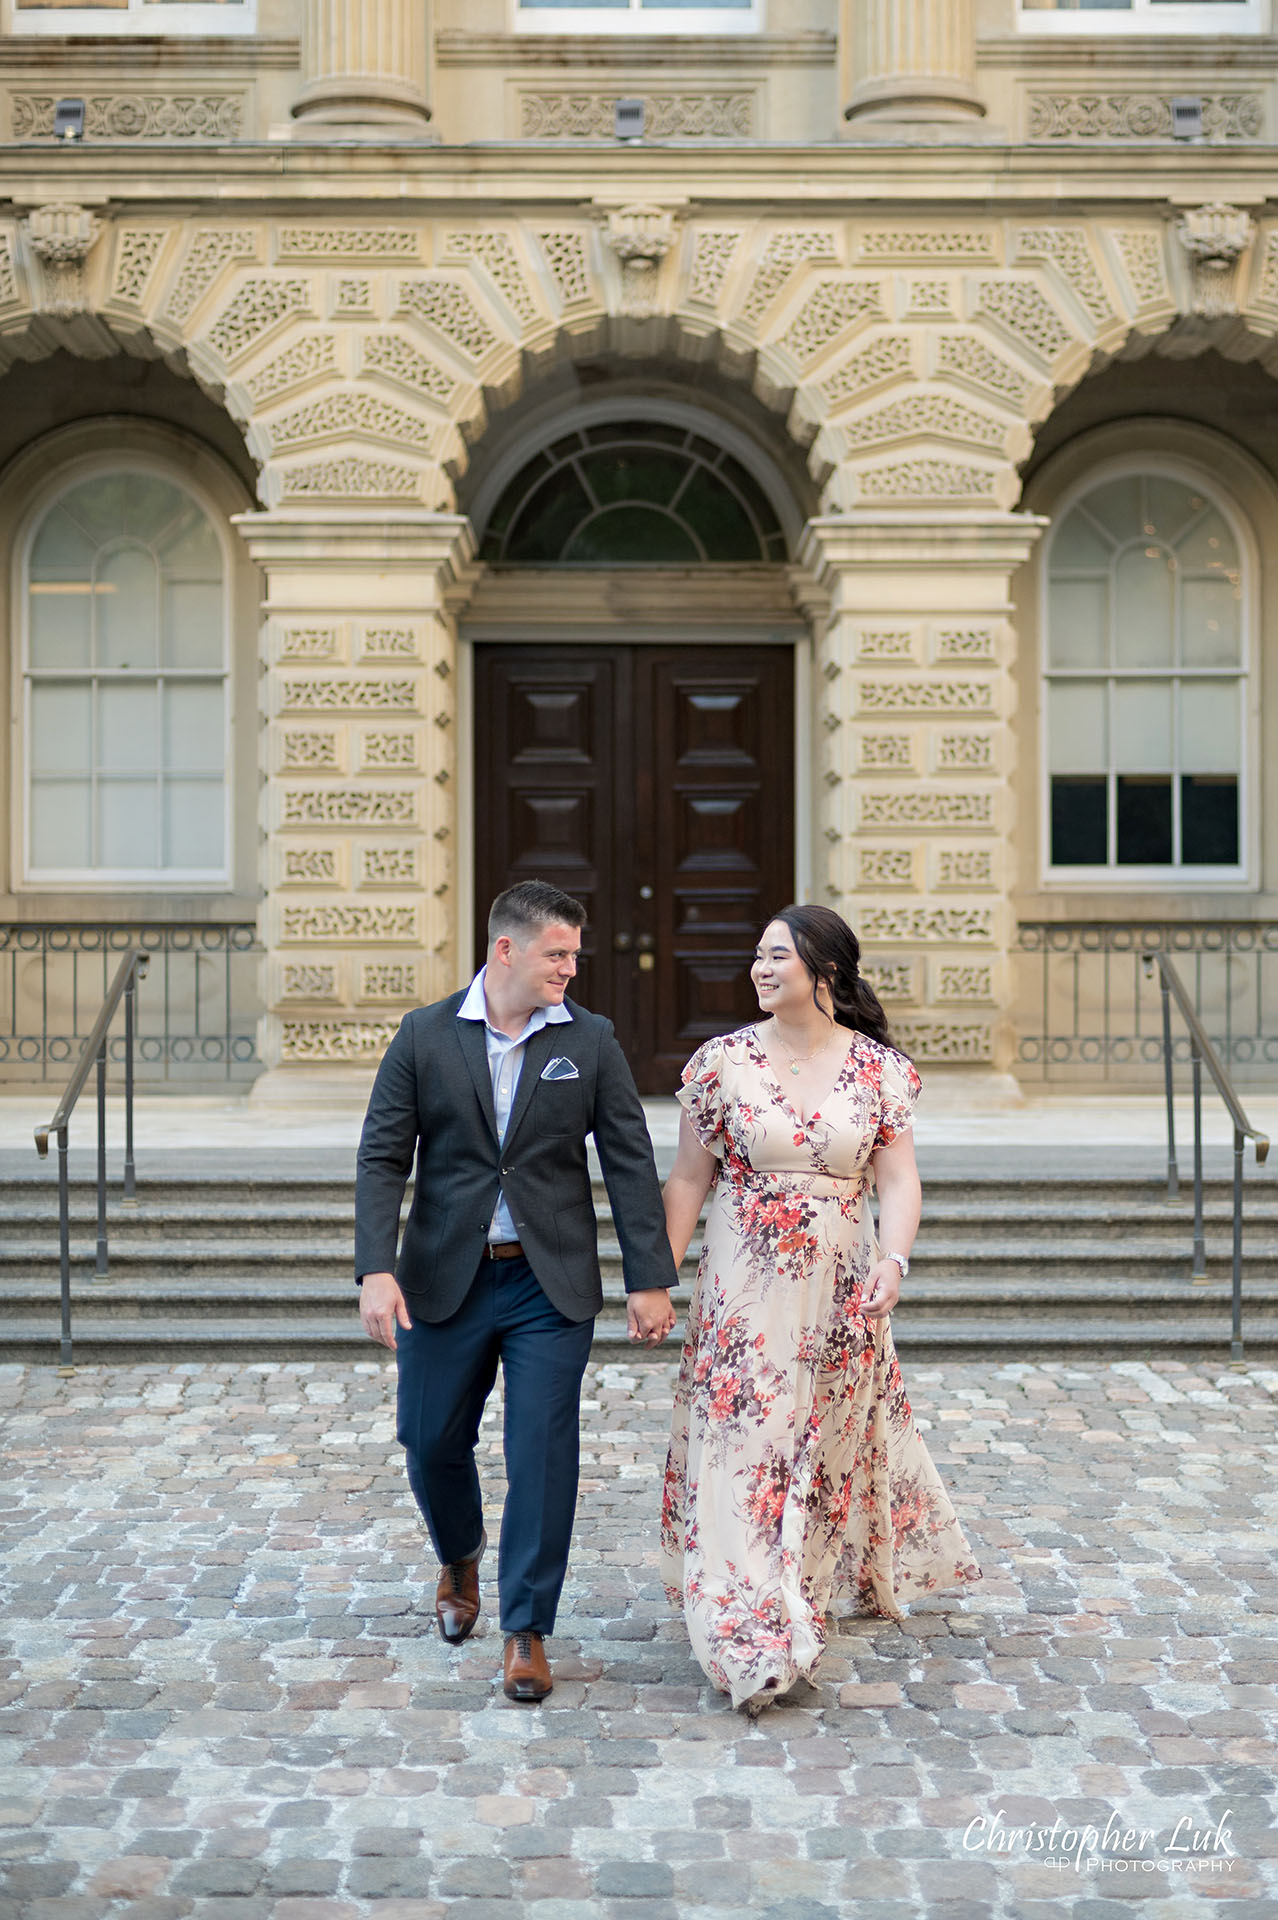 Christopher Luk Toronto Wedding Photographer Engagement Photos Pictures Session Osgoode Hall Nathan Philips Square City Hall Bride Groom Natural Candid Photojournalistic Organic Sunset Holding Hands Walking Together Portrait